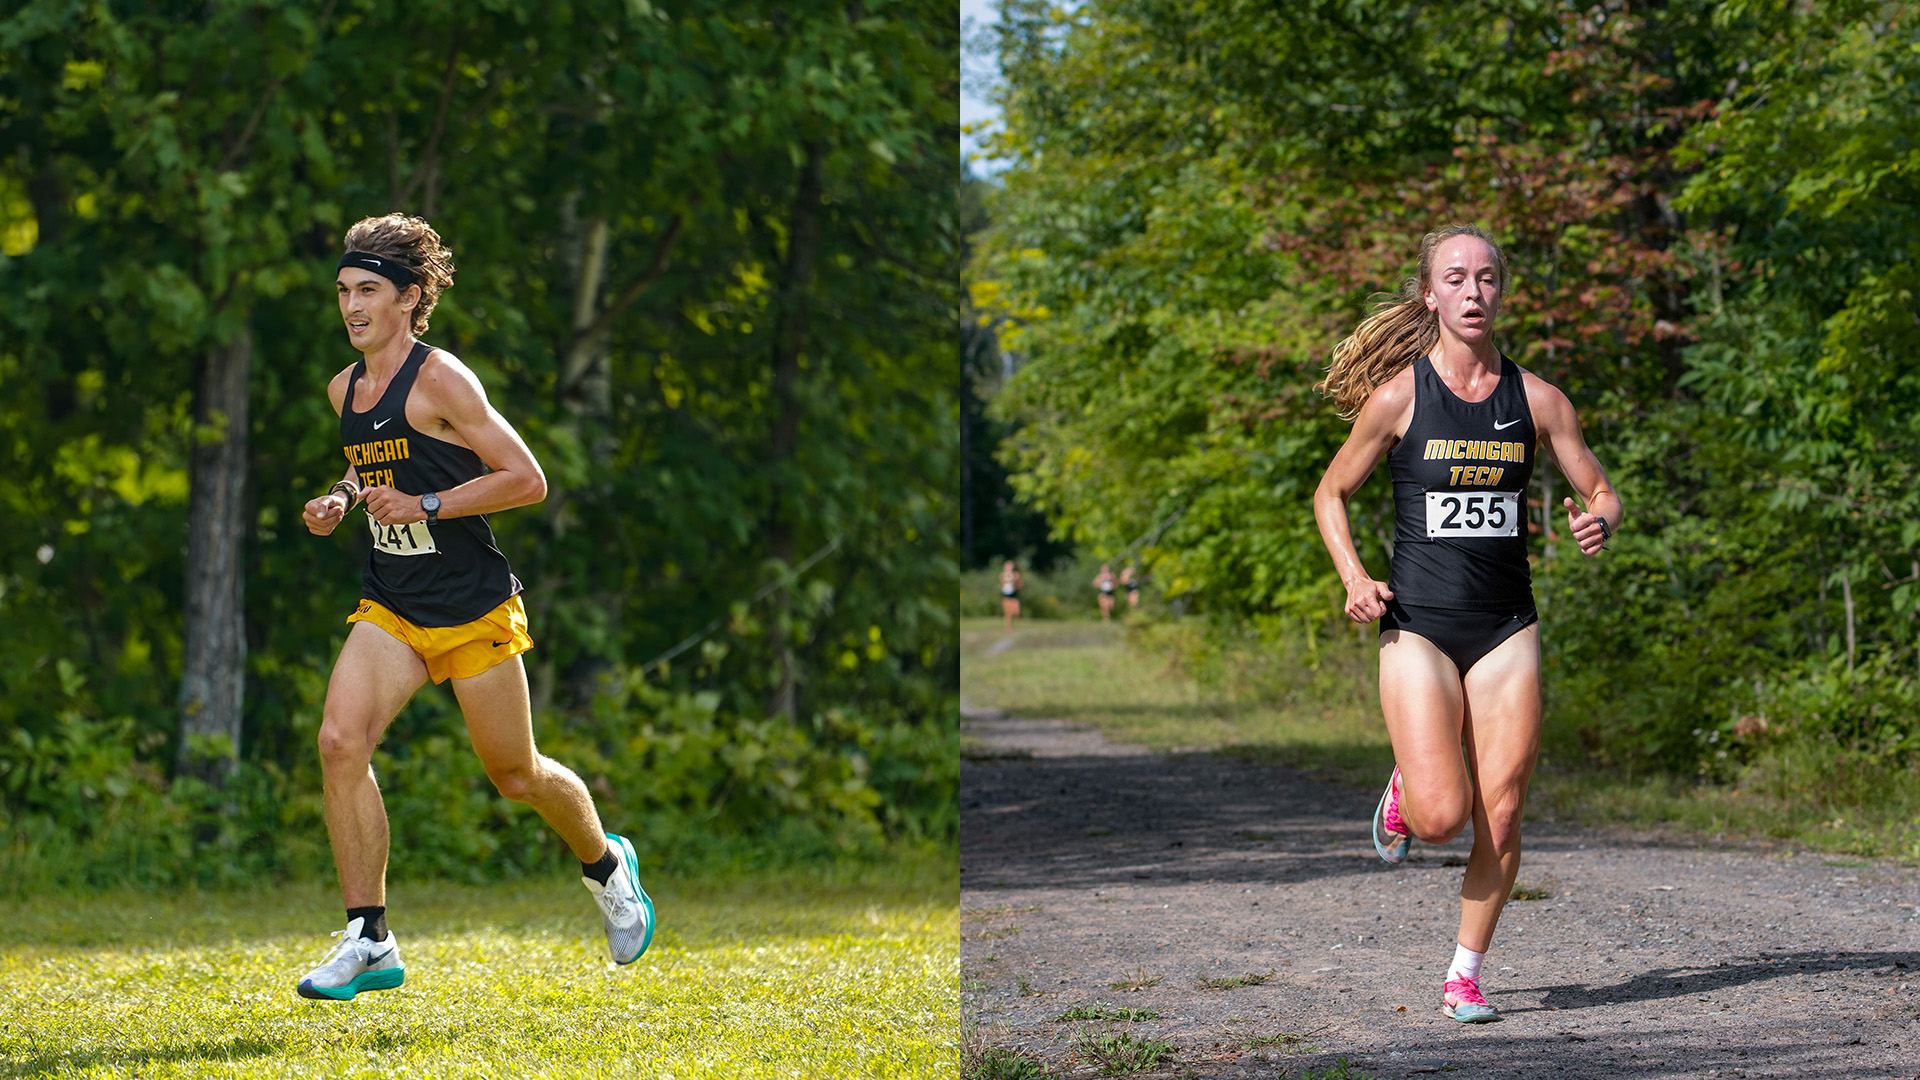 Michigan Tech Cross Country Sweeps Conference Players of the Week